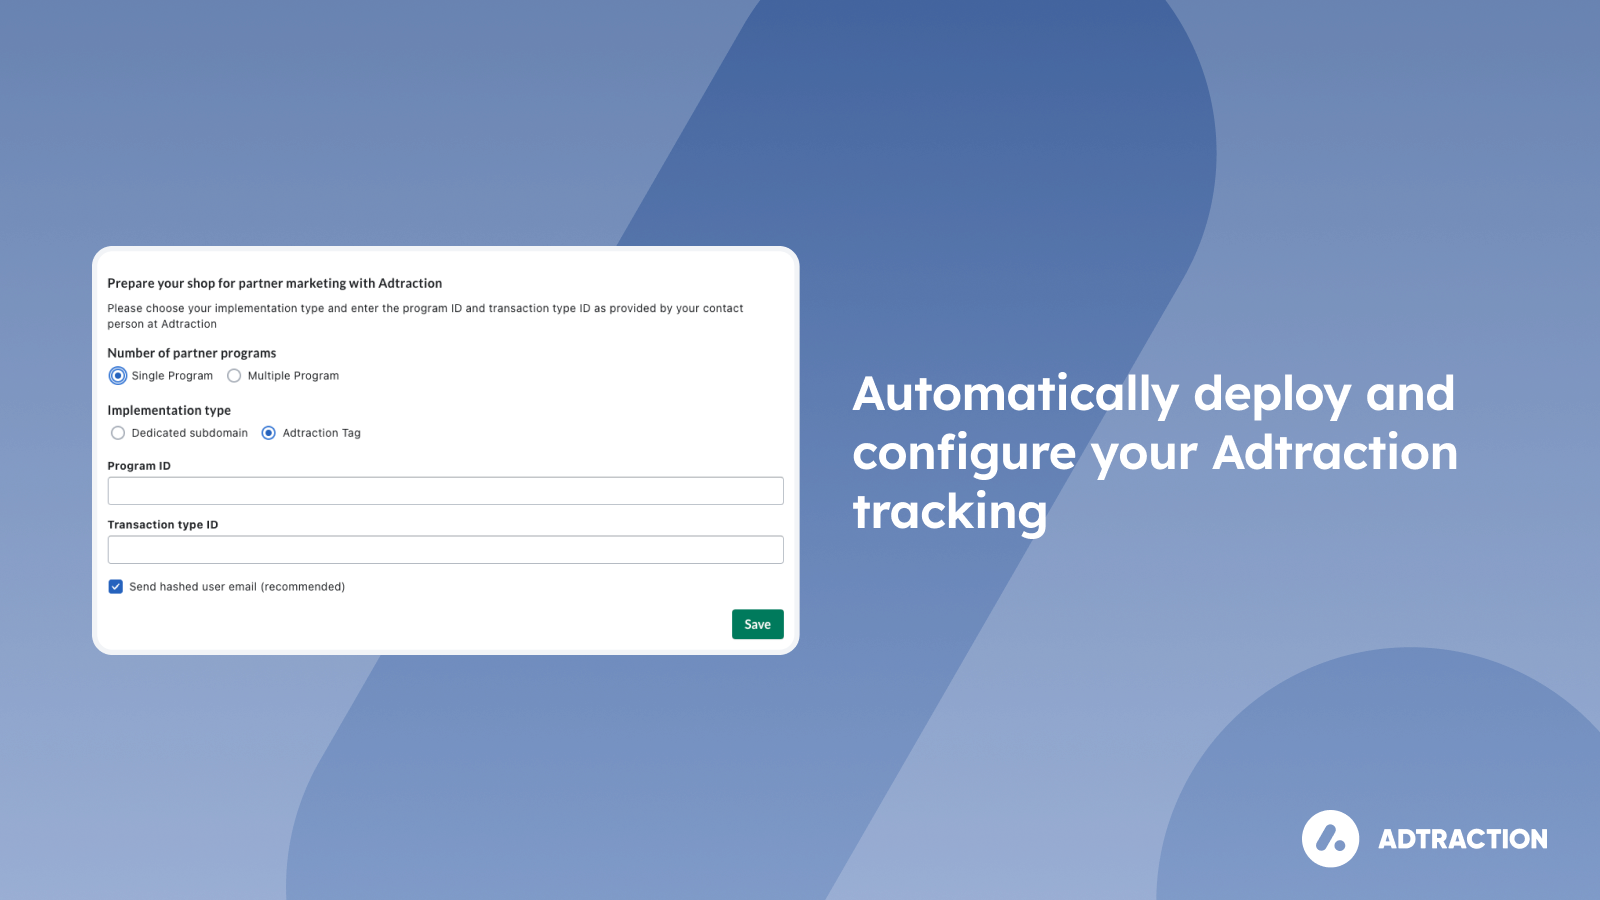 Automatically deploy and configure your Adtraction tracking